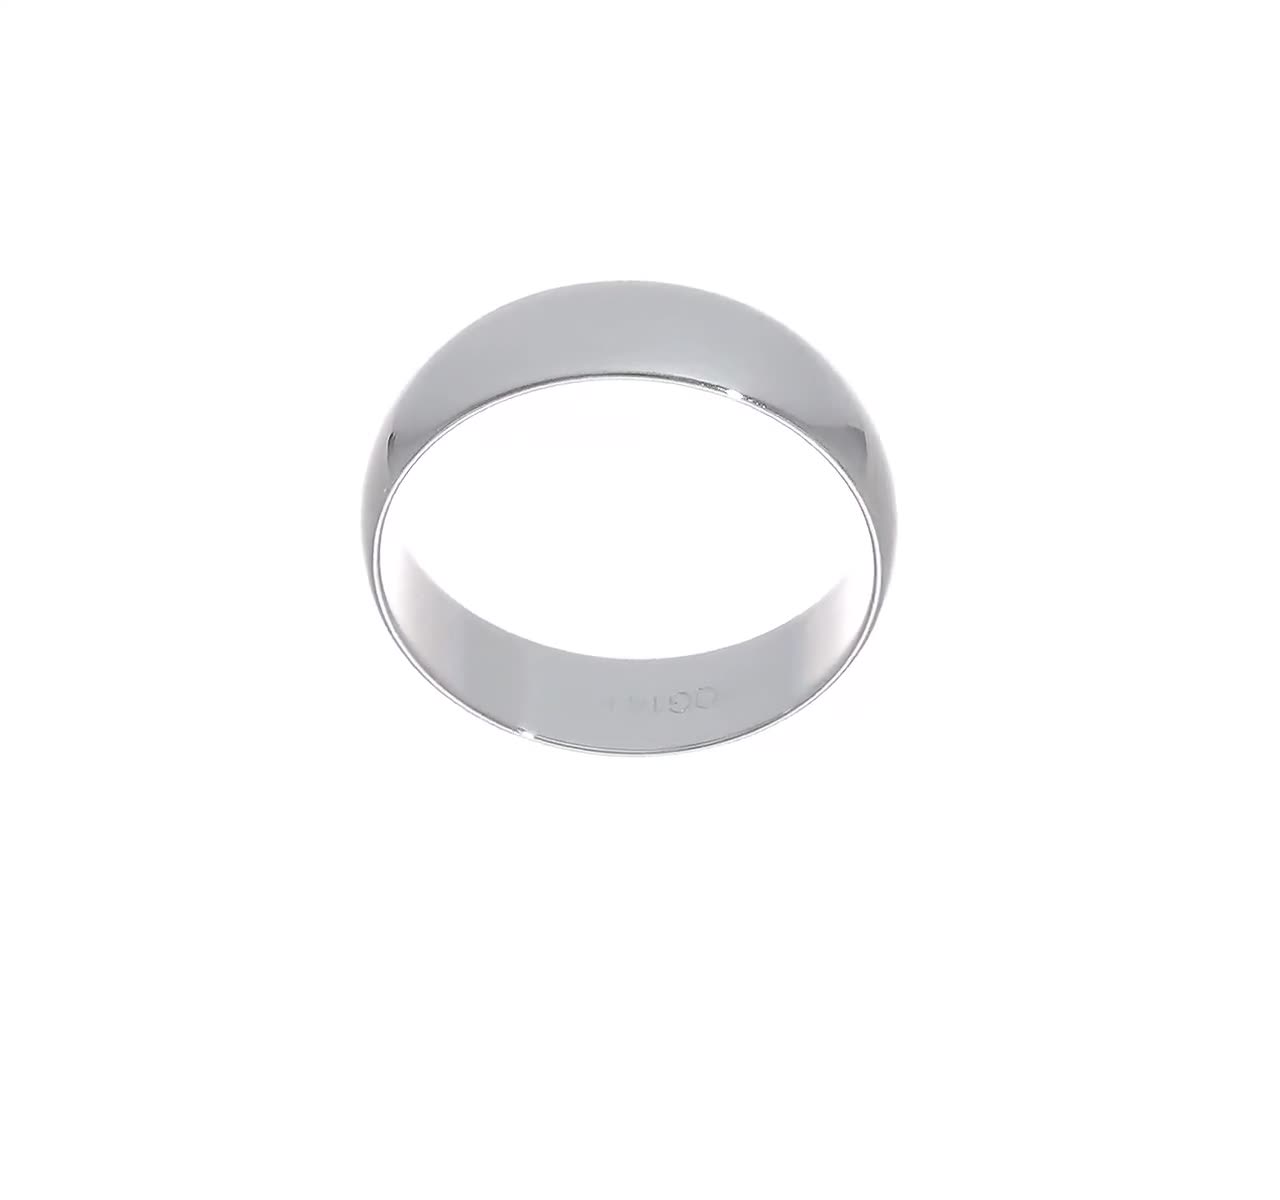 Security Jewelers 10k White Gold 4mm Half Round Band Ring Size 10.5 10kt White Gold